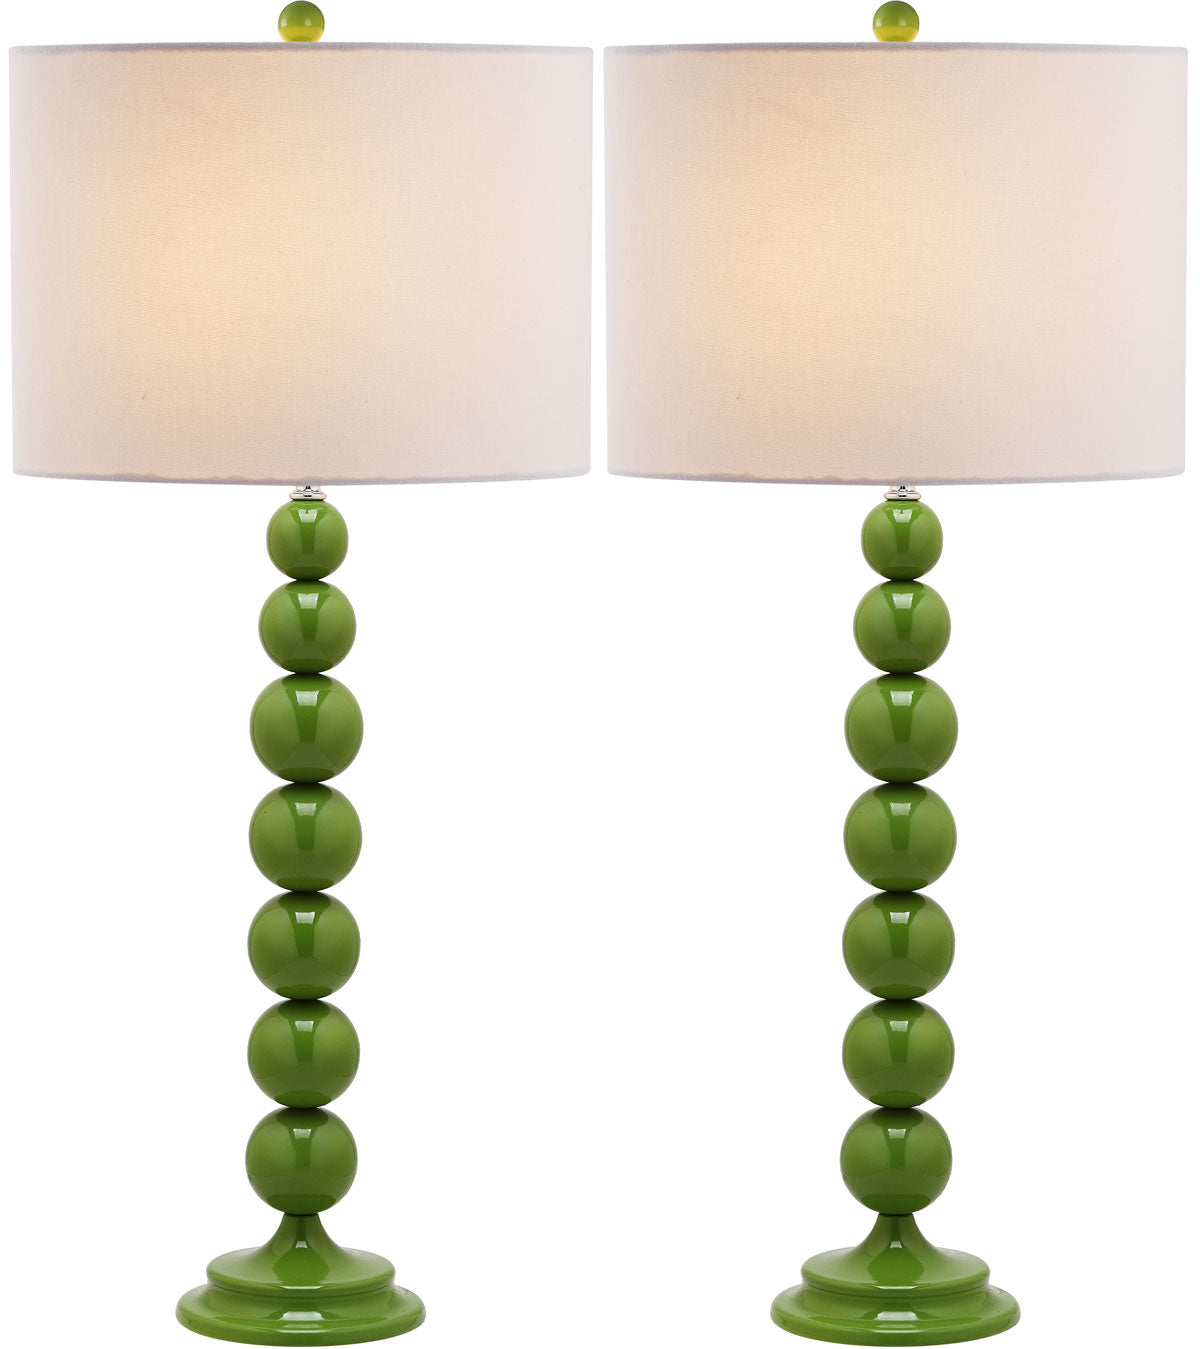 *AS IS* JENNA 31.5-INCH H STACKED BALL LAMP set of 2, #6945